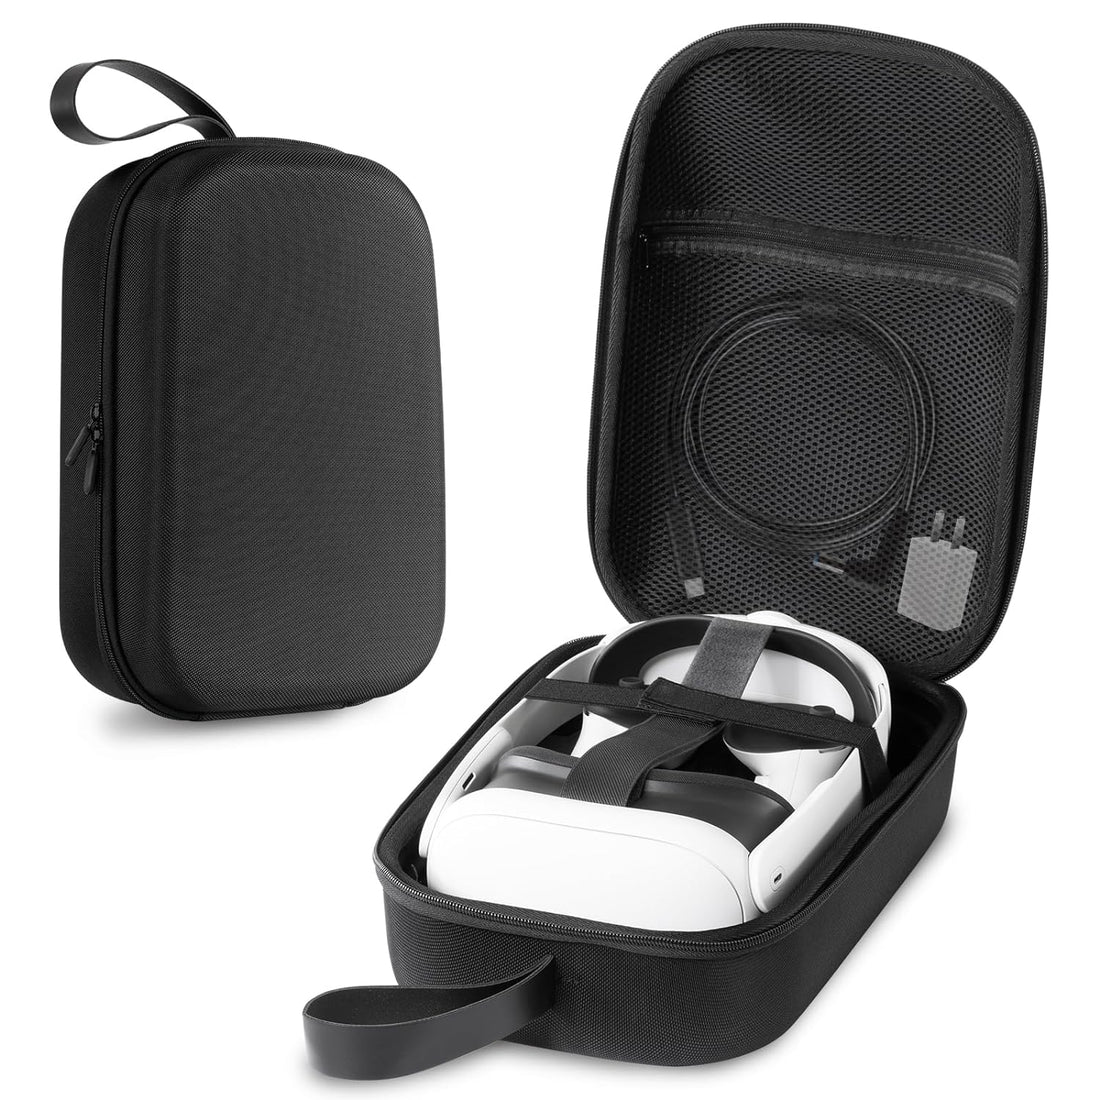 CoBak Hard Carrying Case for Meta Quest 3 - Compact design, Multiple Compartments for Elite Version VR Headset, Controllers and Accessories, Travel with Protection, Black